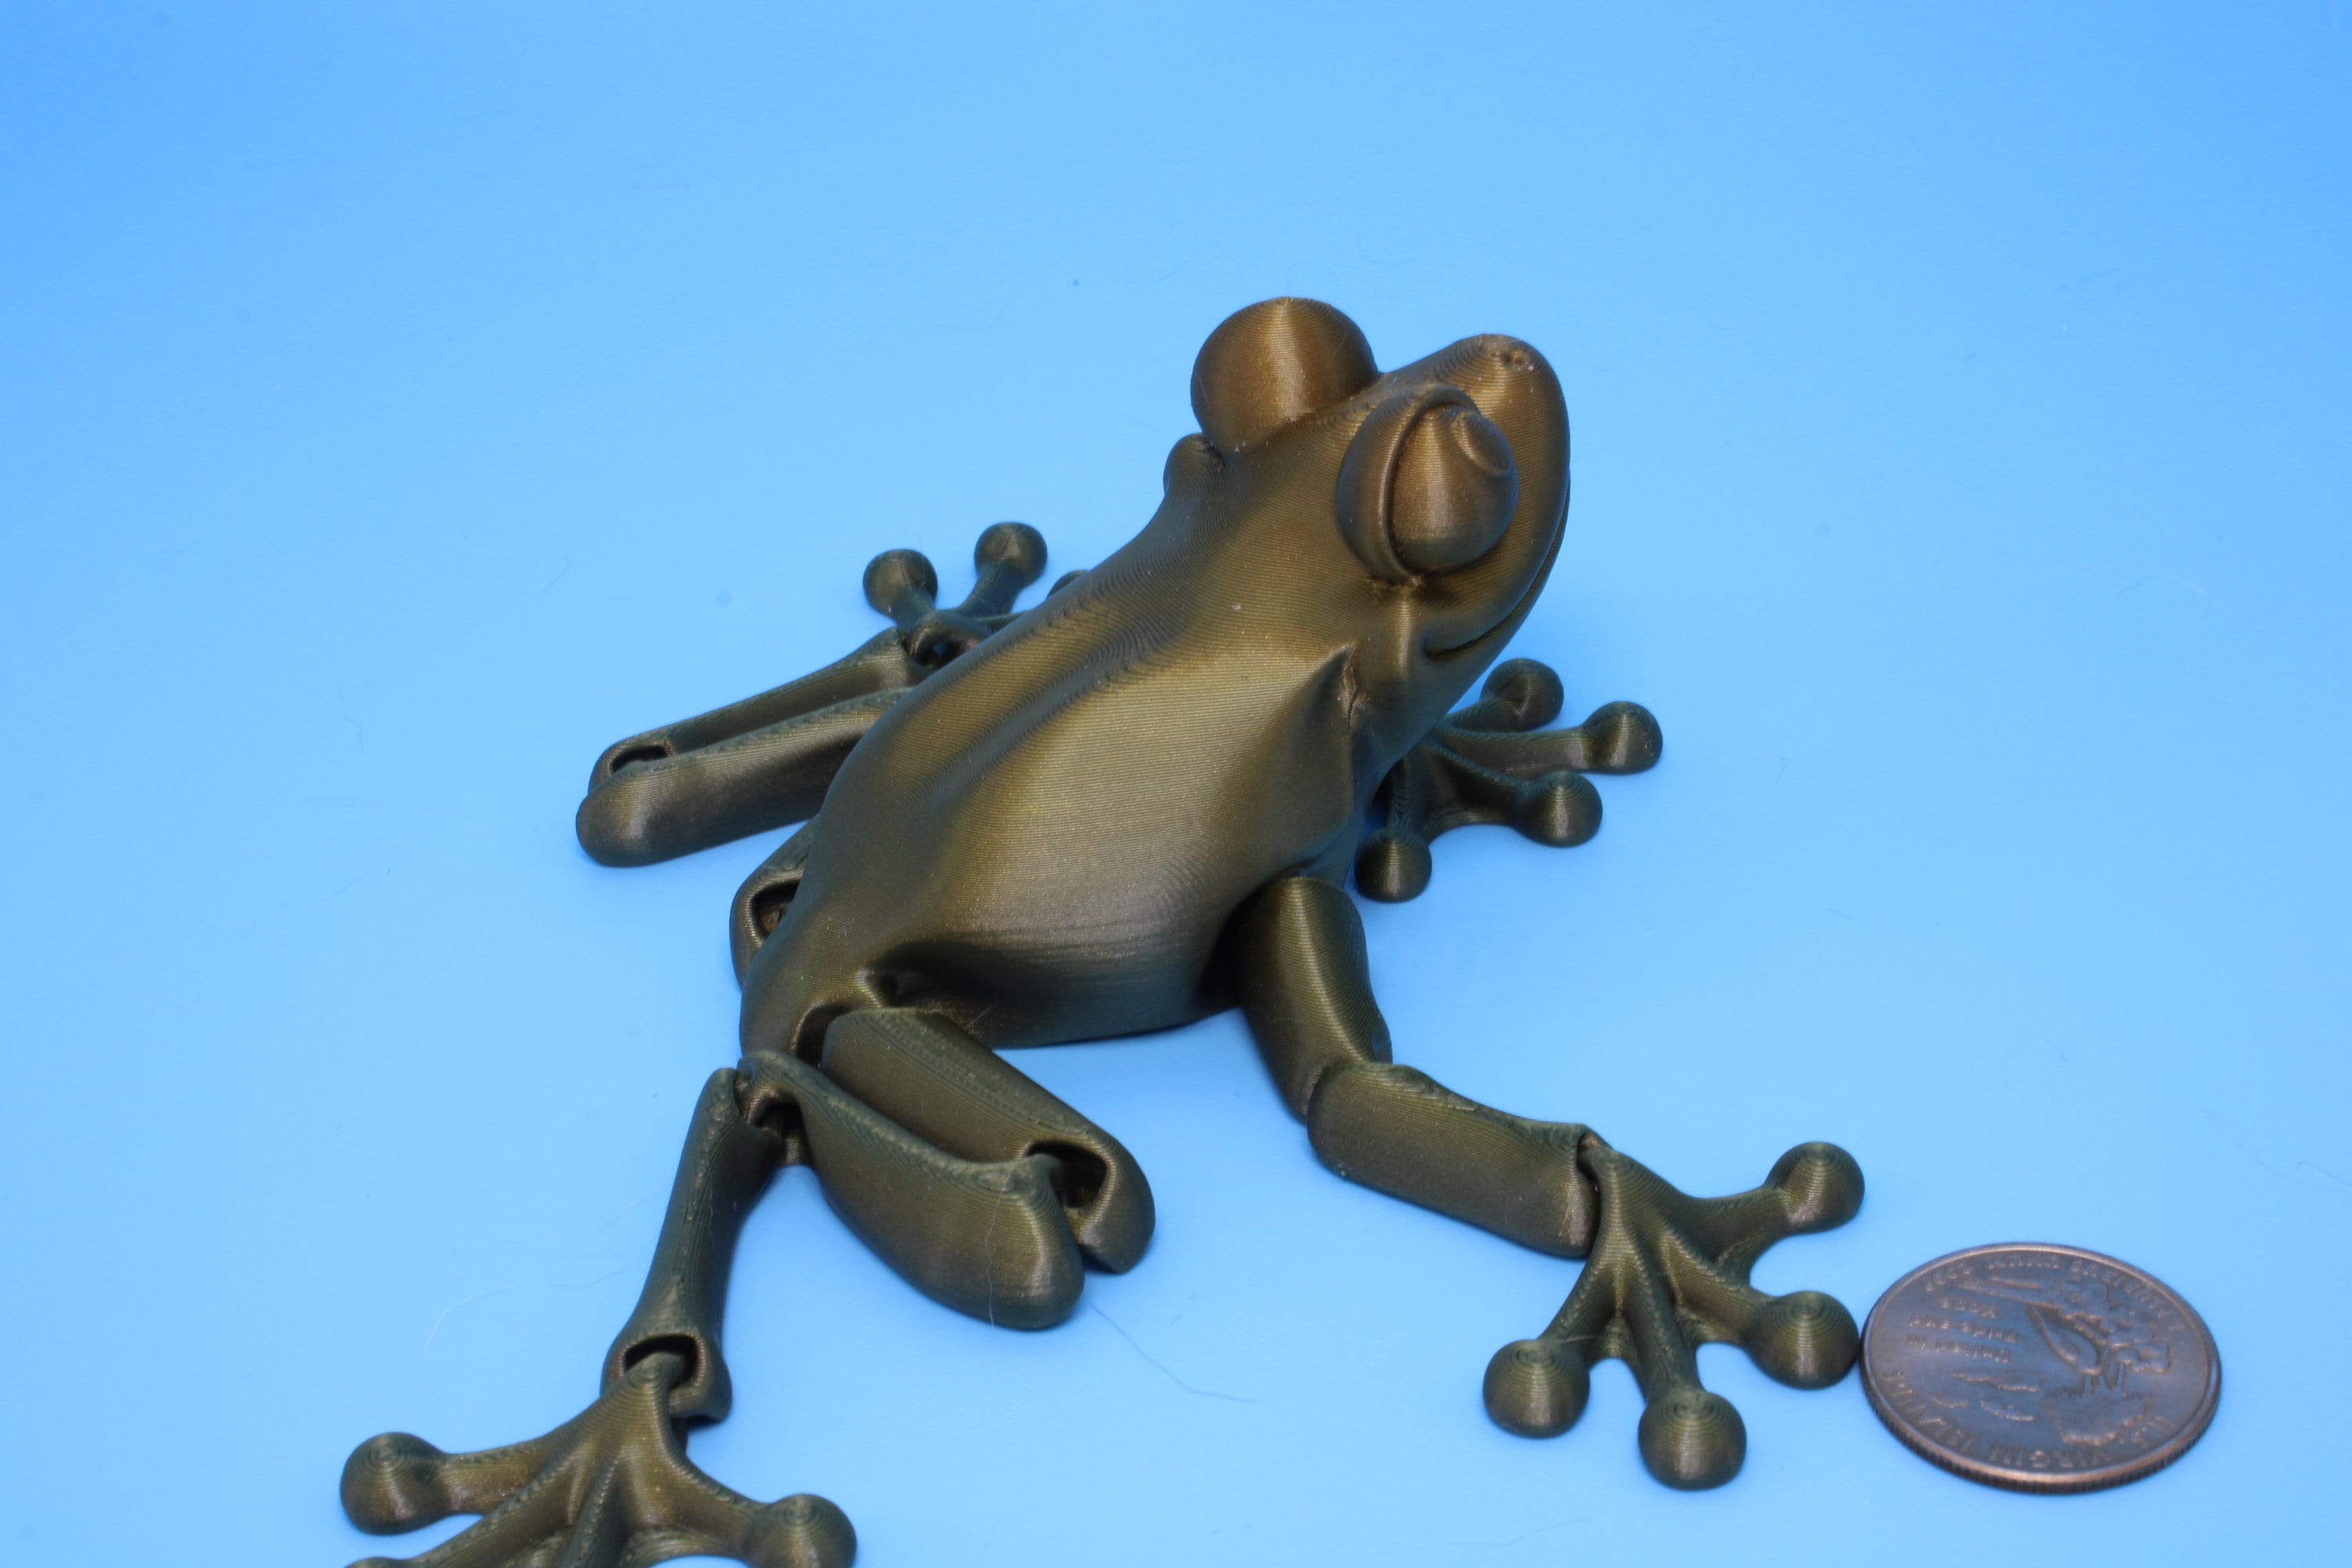 Frog | Cute Flexi Toy | Articulating Frog | 3D printed Unique Fidget | Desk Buddy | Sensory Toy | Stim Toy | Small Flexi Toy.